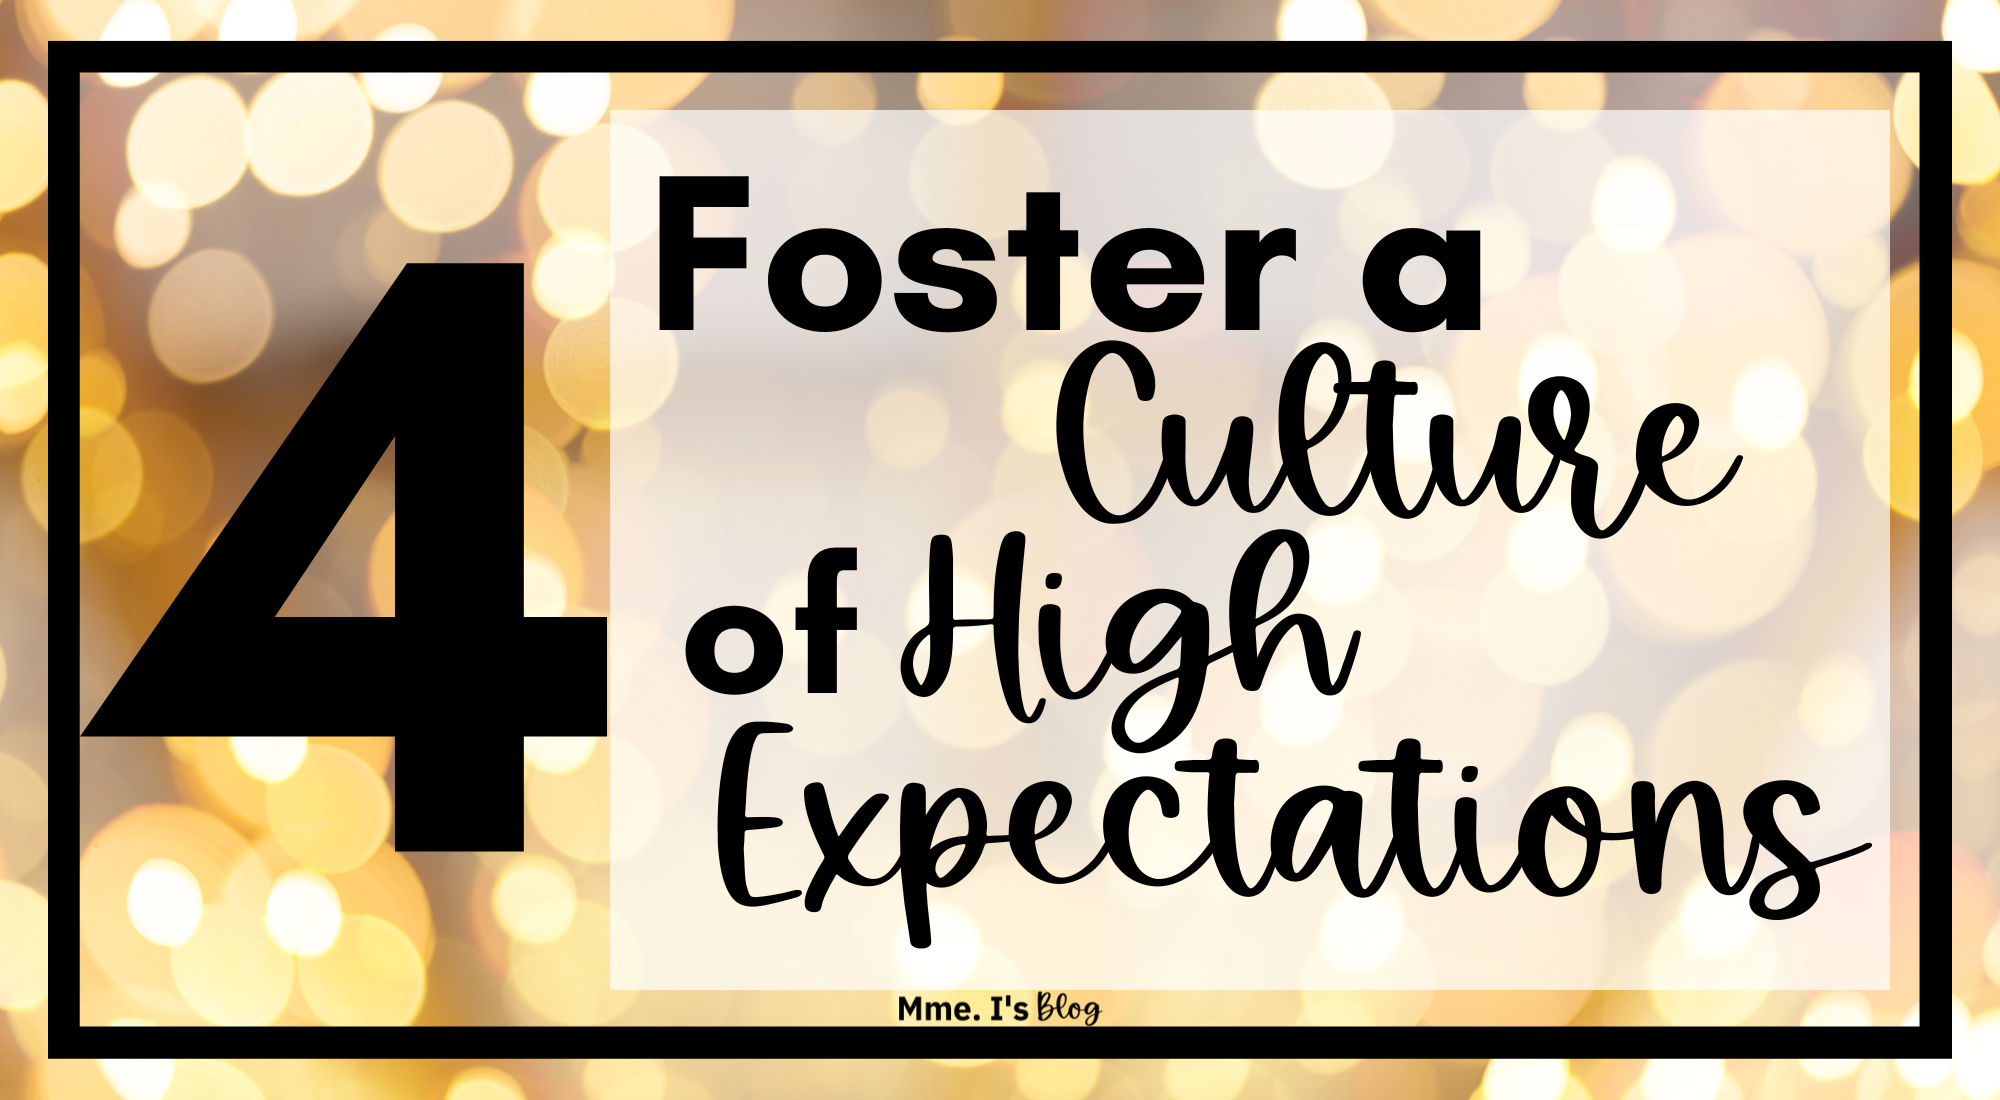 Foster a Culture of High Expectations